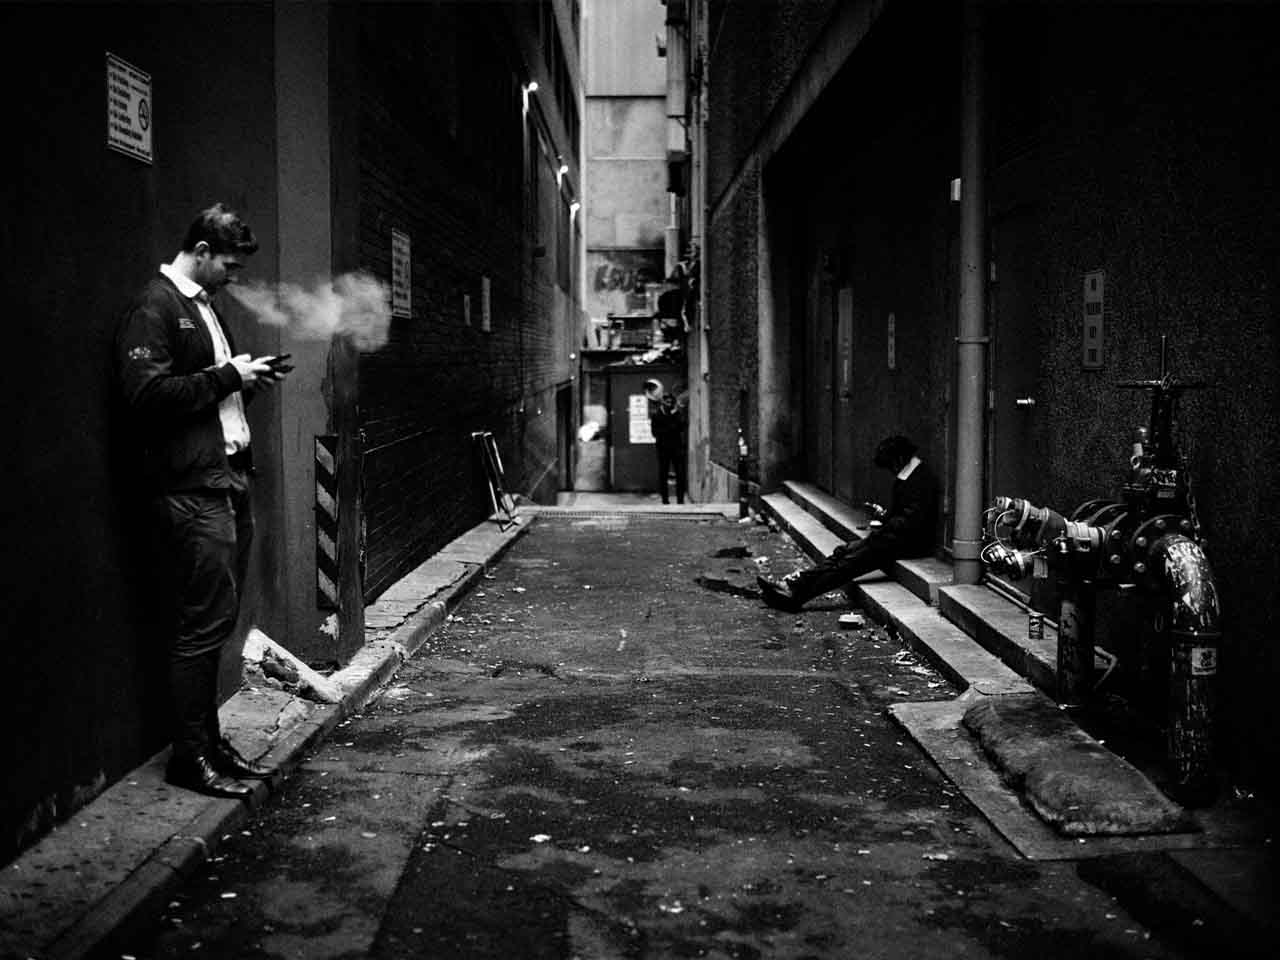 Smokers in a Sydney laneway